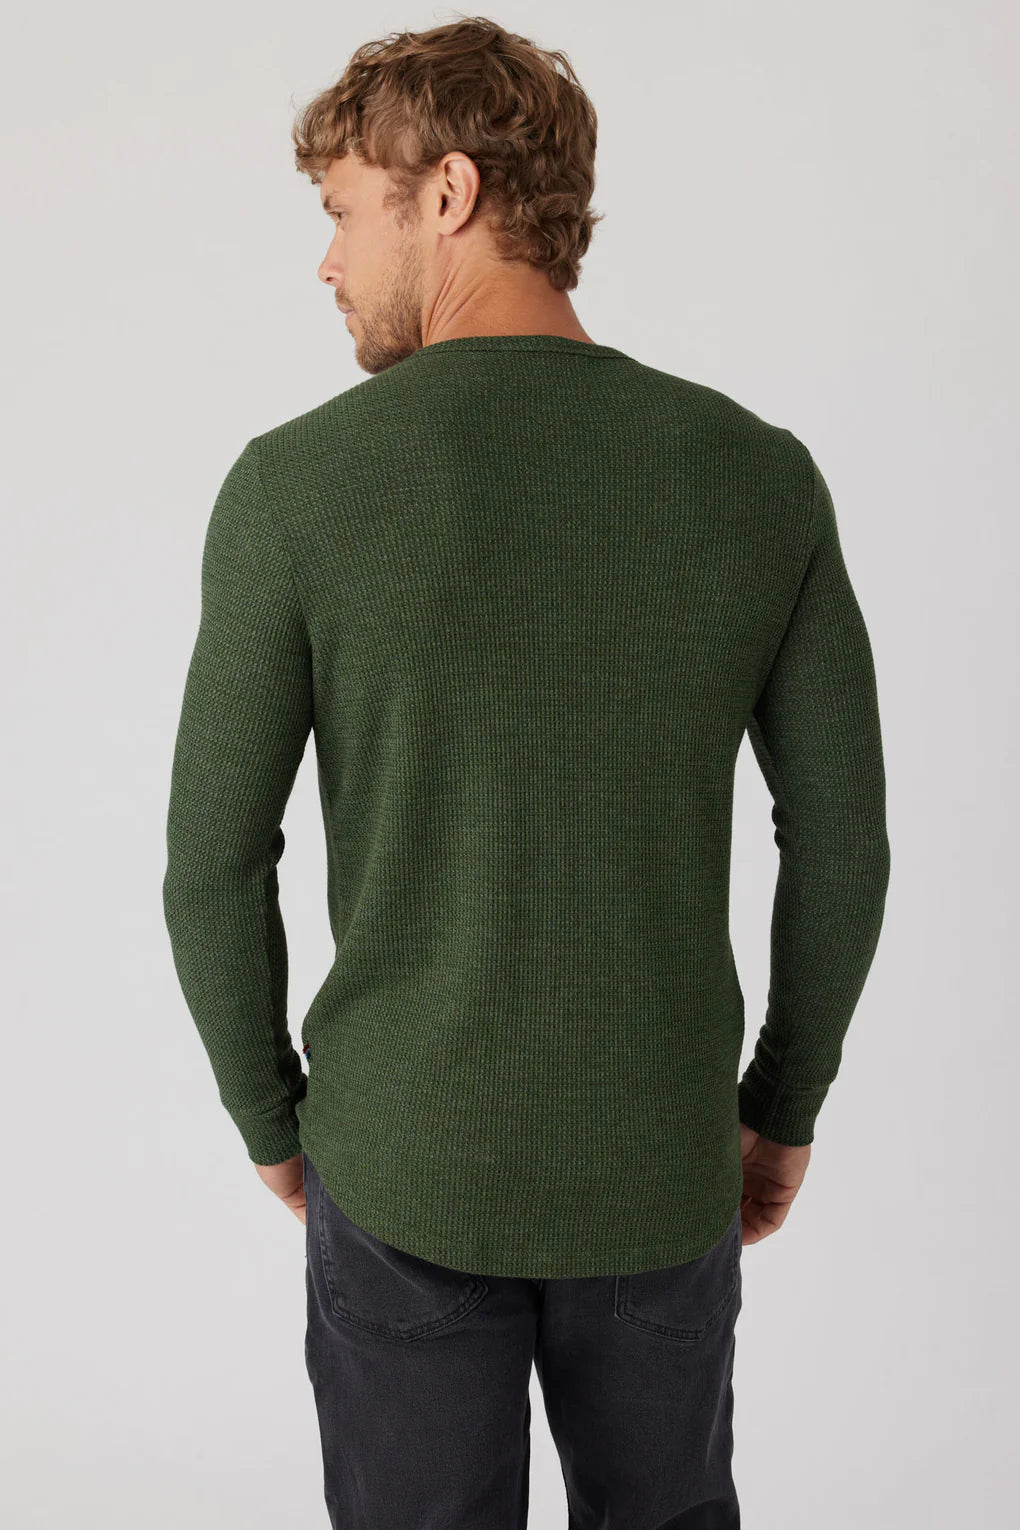 THERMAL L/S HENLEY - CYPRESS